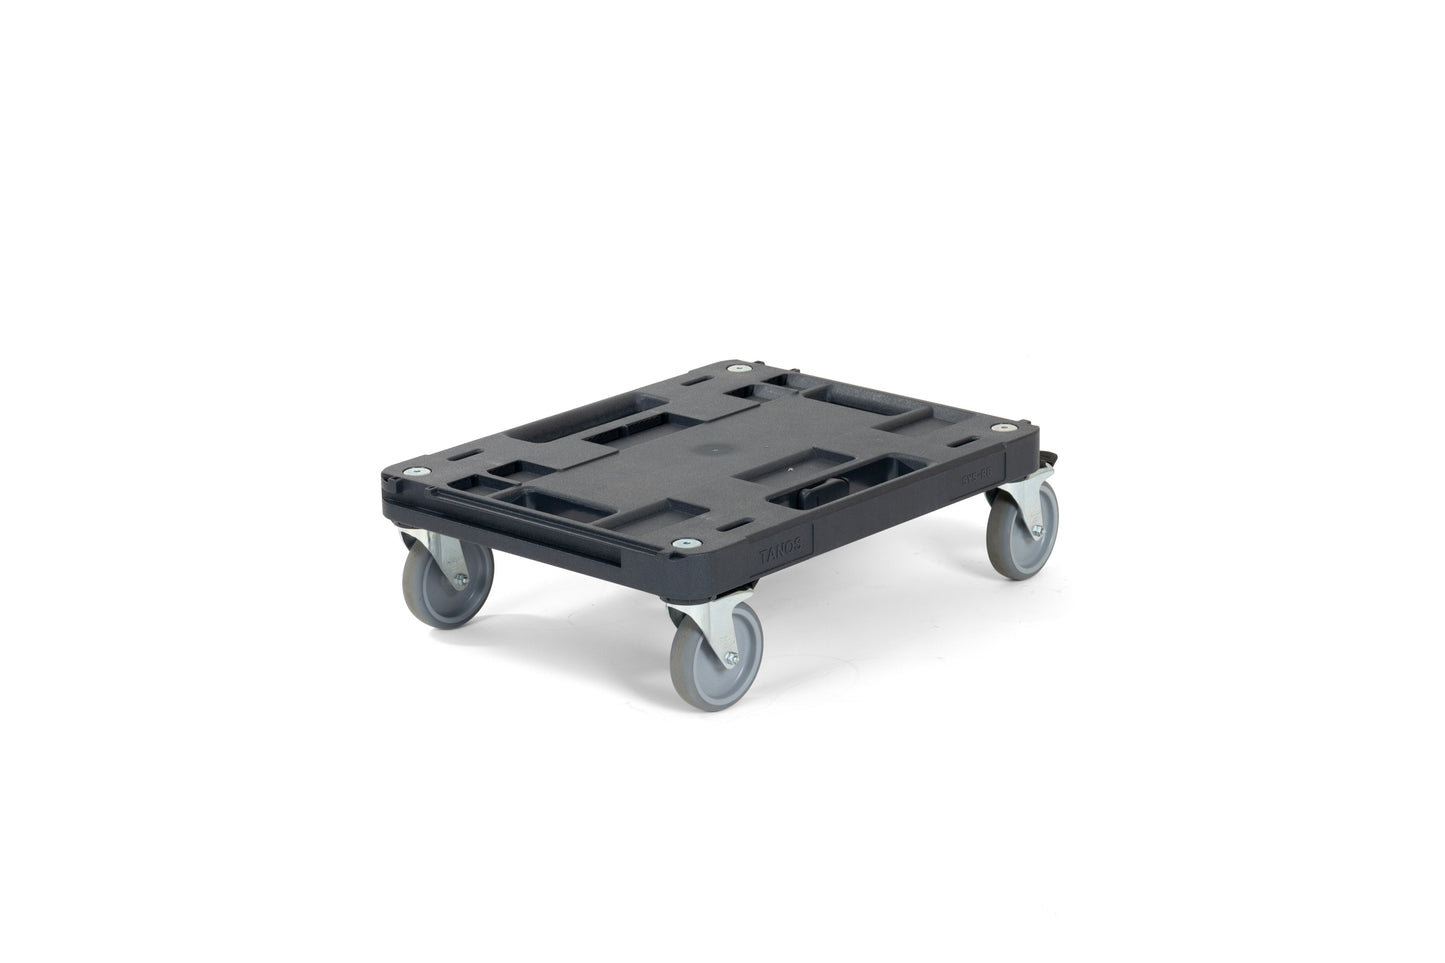 Designed to hold your hPACK Cases securely, this dolly is built for durability and mobility. Sturdy wheels and an ergonomic handle simplify moving your equipment, making your work more efficient and hassle-free. Get the job done without the heavy lifting and enjoy a smoother research experience with our Dolly for the hPACK Mobile Lab Kit.